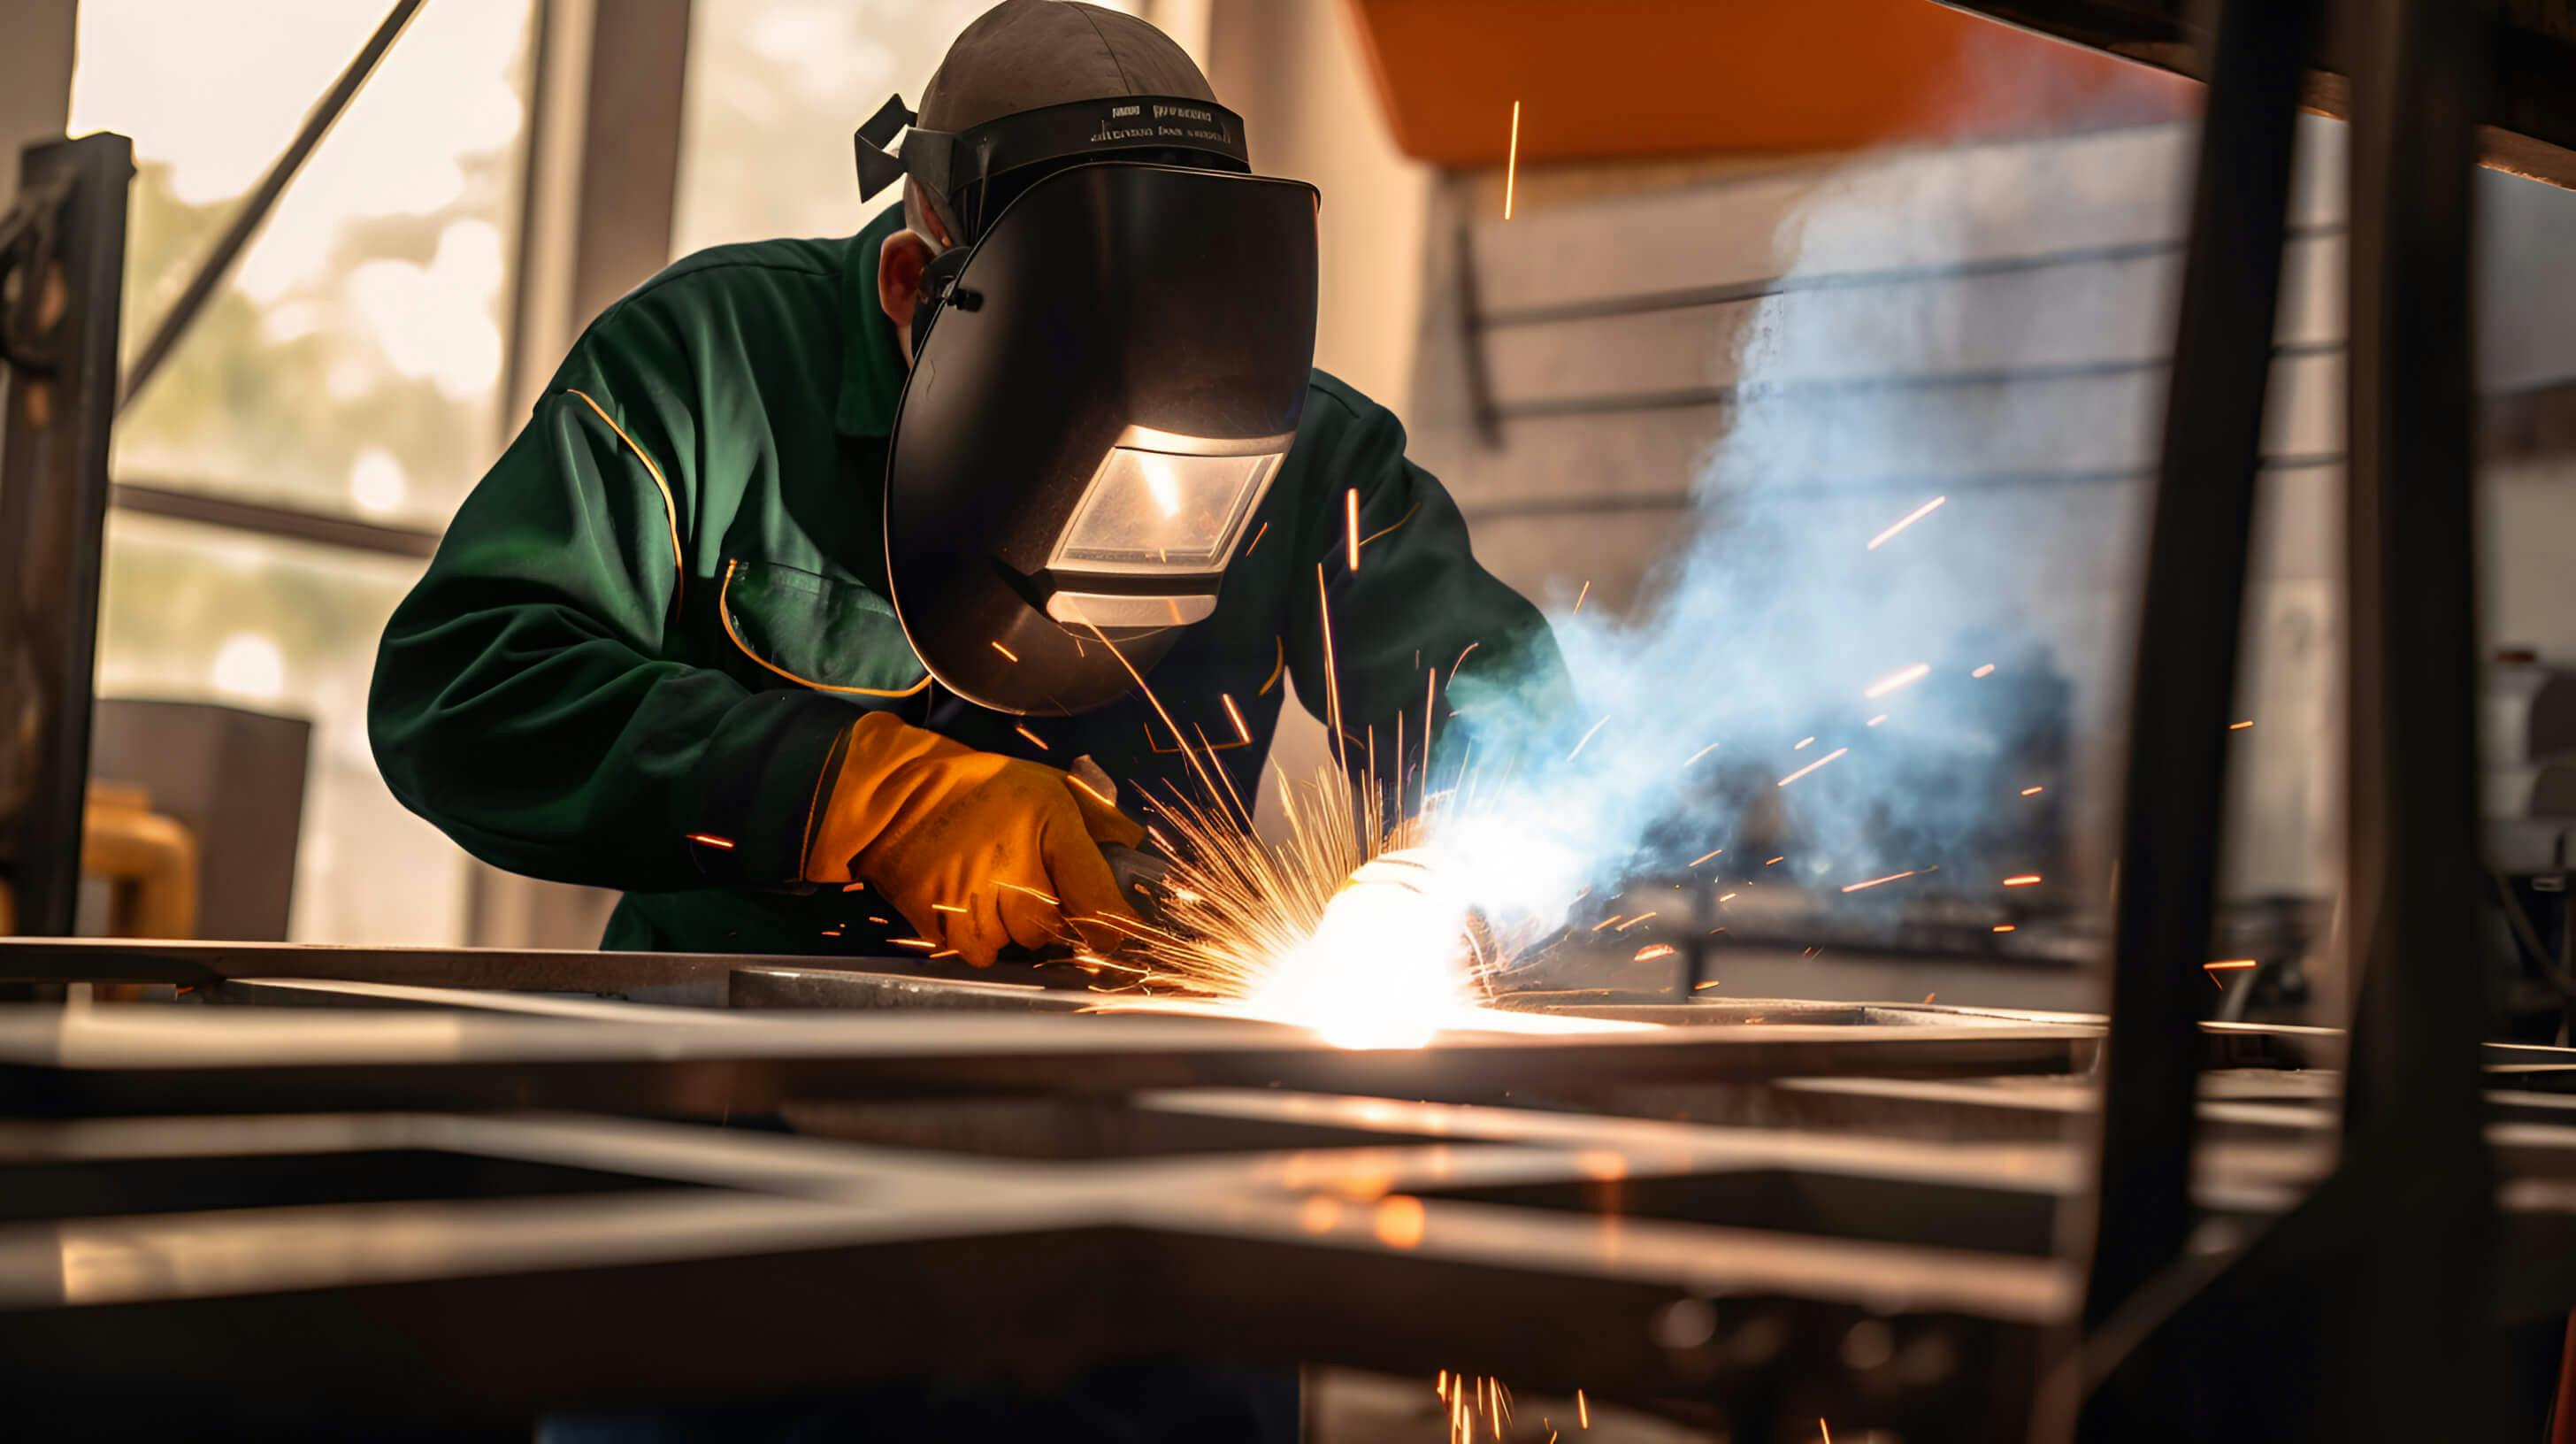 A welder working, with sparks flying off the metal.